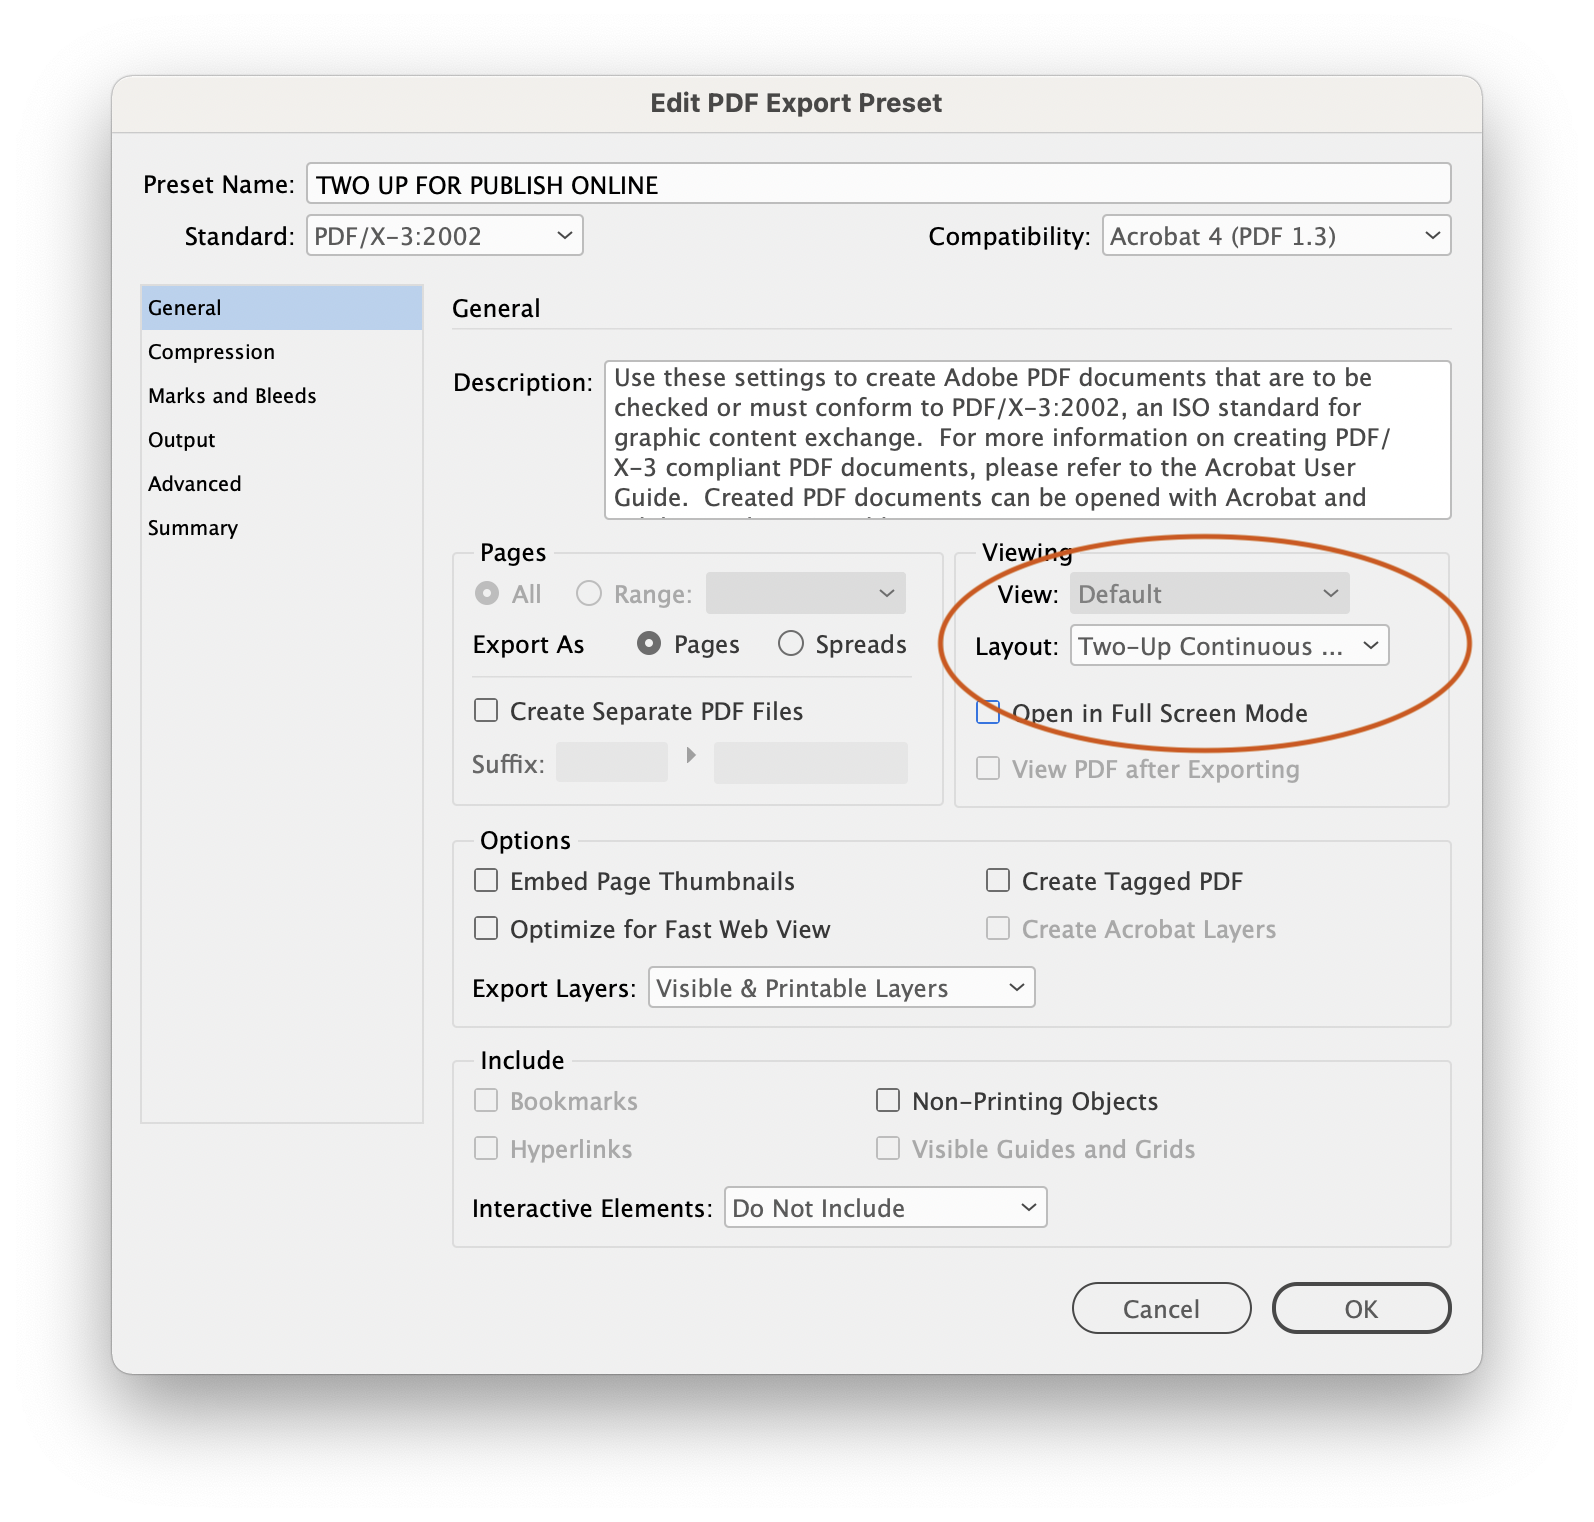 Dialog for defining PDF Preset. Highlighted in image is Layout set as two-up continuous.